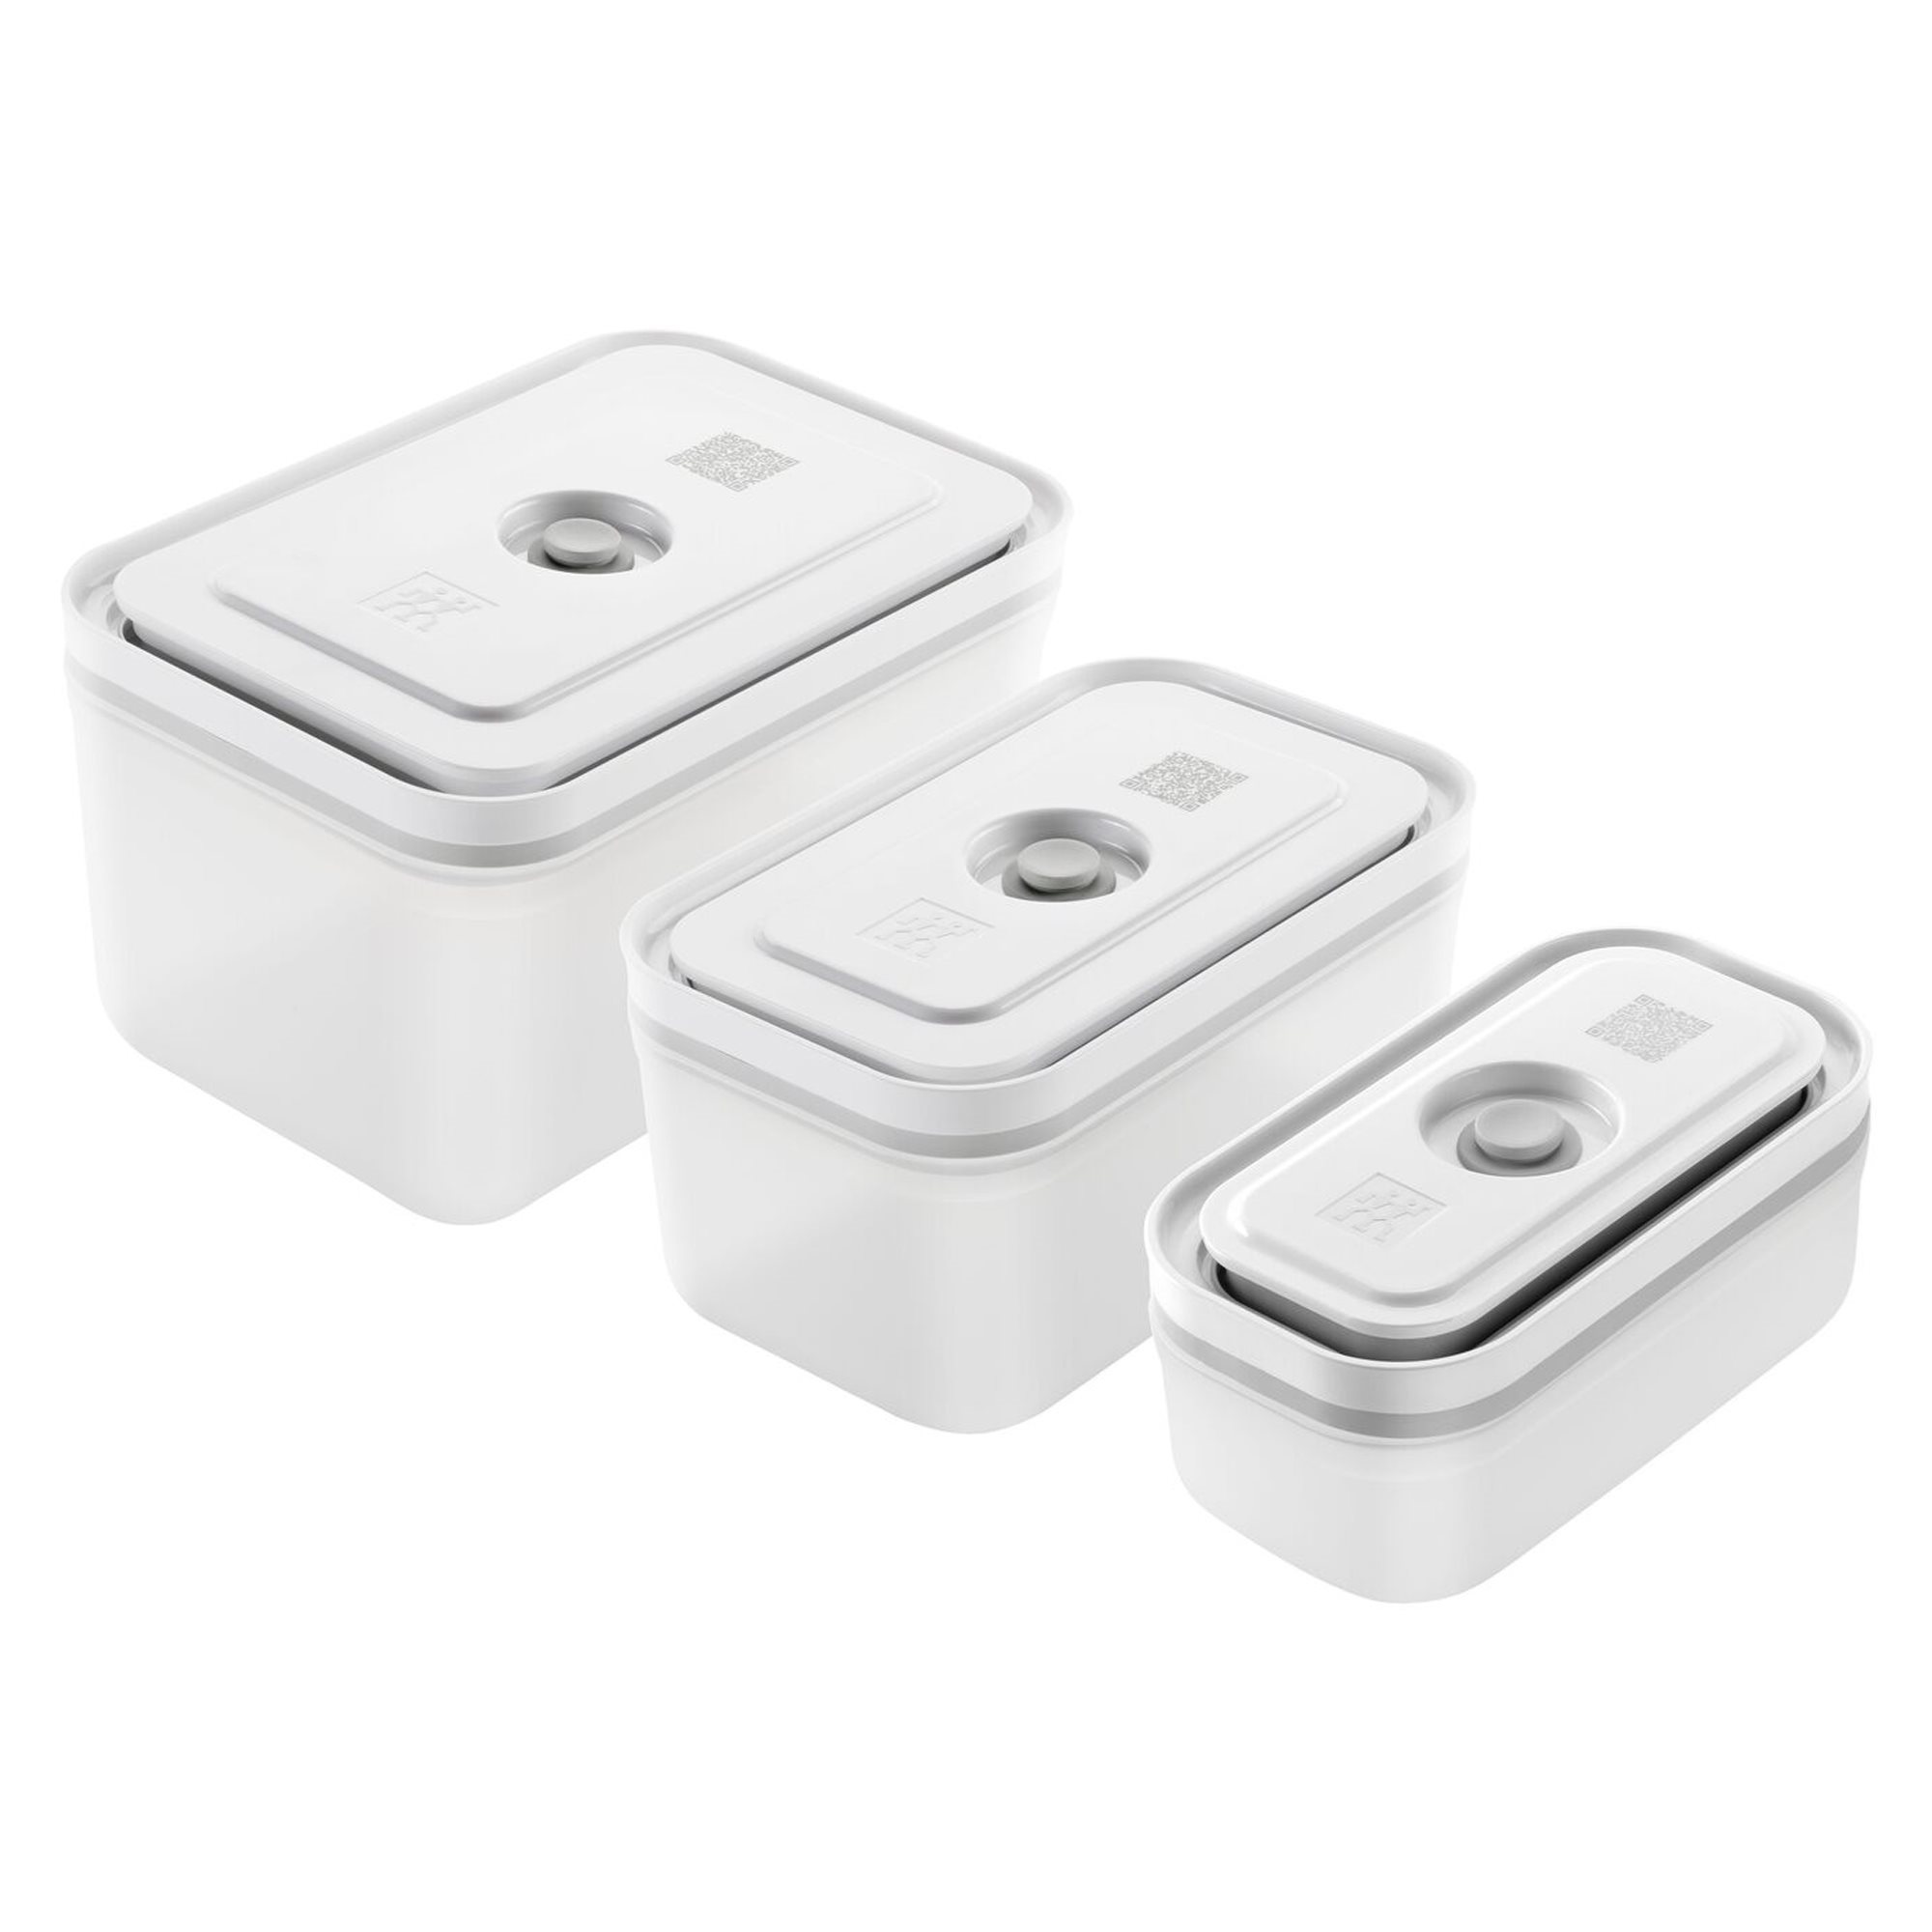 ZWILLING Fresh & Save Glass Vacuum Containers, Set of 3